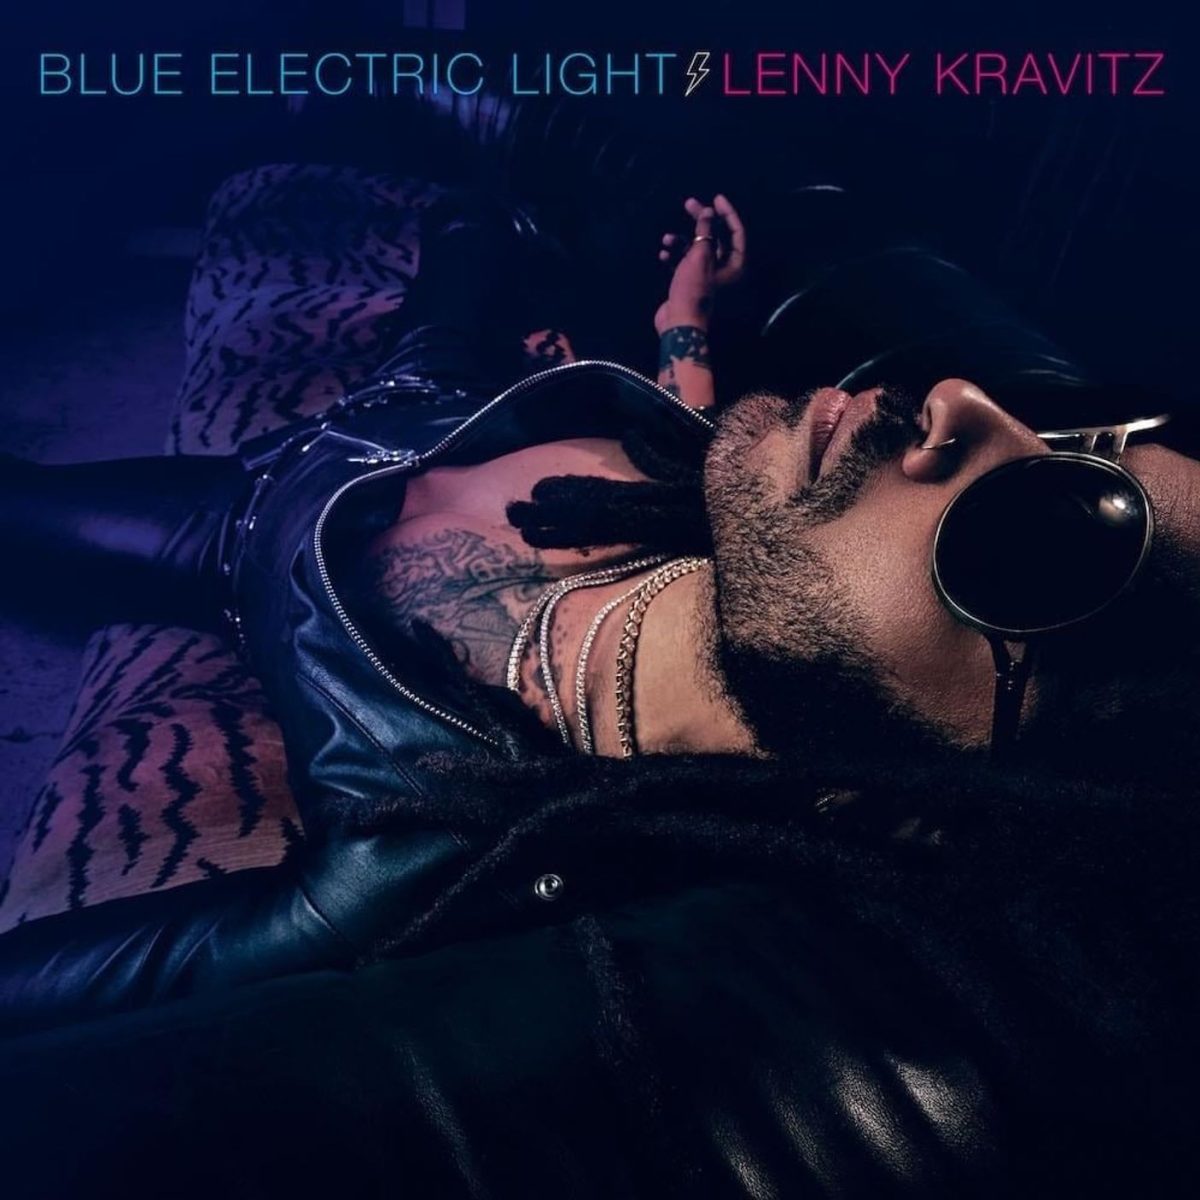 Album cover of “Blue Electric Light” by Lenny Kravitz. The rock album was released on May 24.